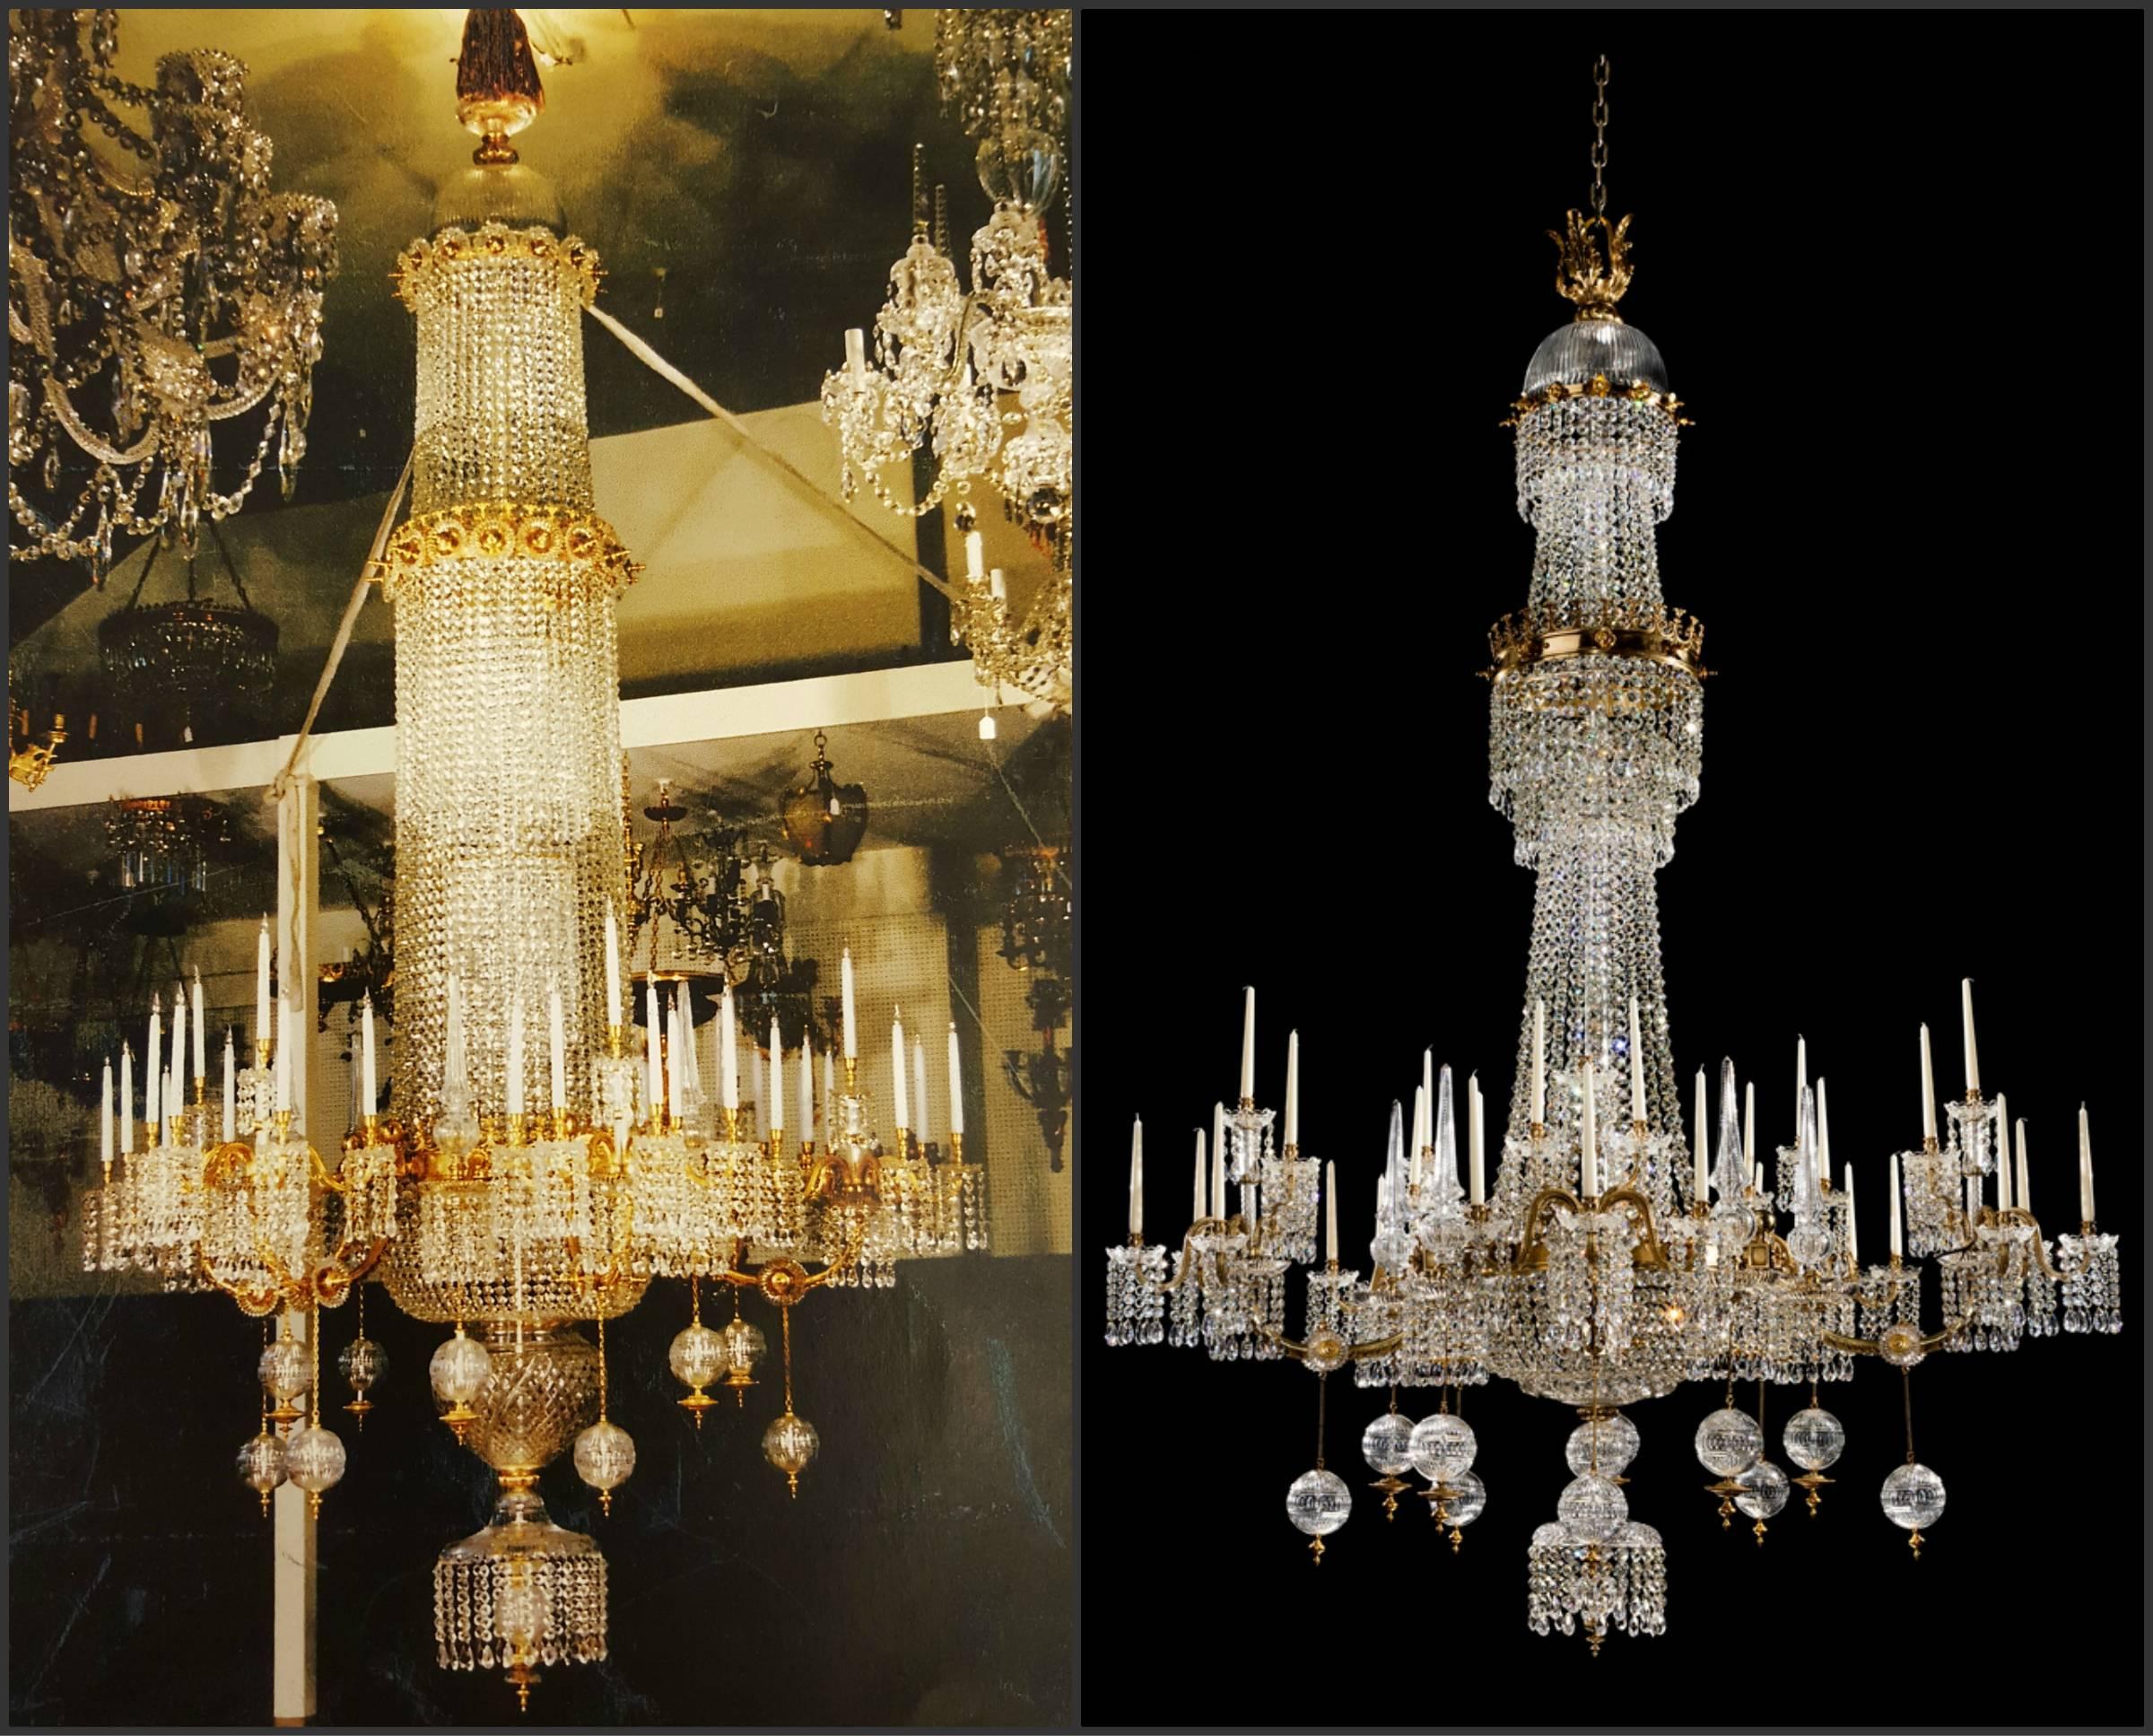 A magnificent pair of chandeliers originally designed for use with gas, they have been adapted to hold wax candles, each of the five arms holding six candles and can be wired for electricity if required. Restoration works included the manufacture of